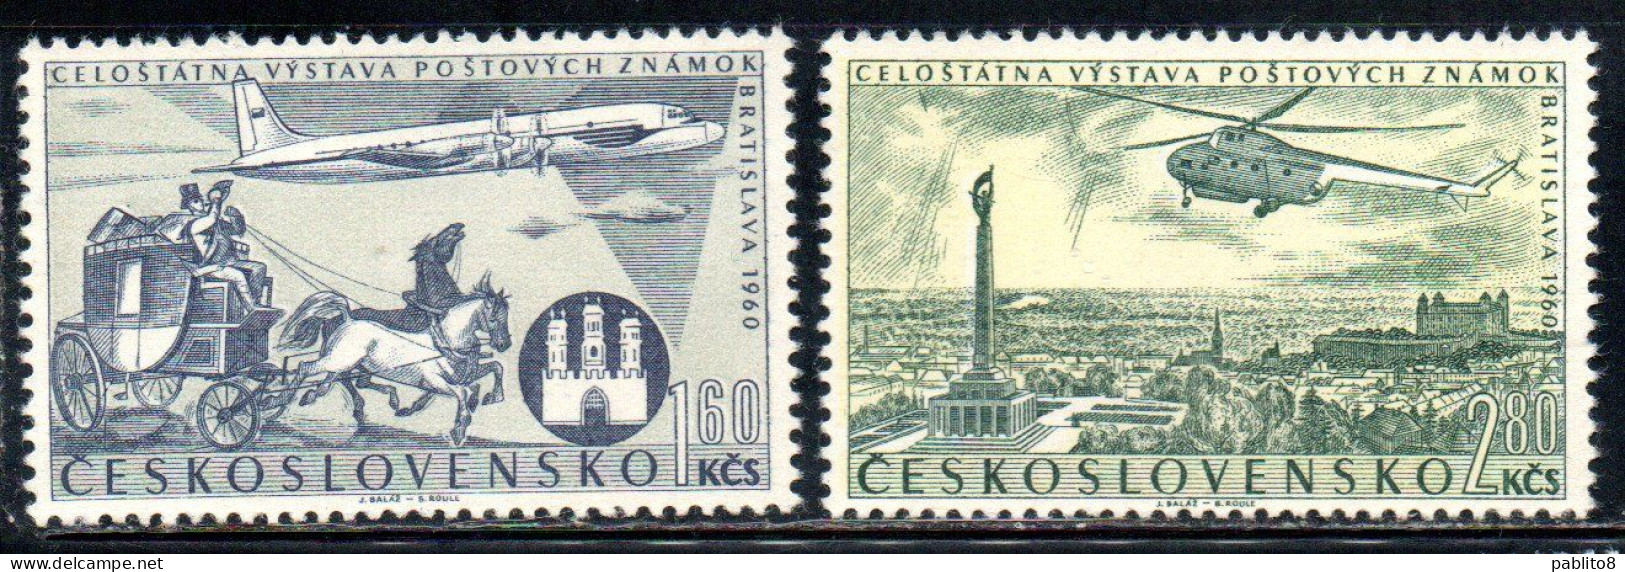 CZECHOSLOVAKIA CECOSLOVACCHIA 1960 AIR POST MAIL AIRMAIL NATIONAL STAMP EXHIBITION COMPLETE SET SERIE COMPLETA MNH - Corréo Aéreo